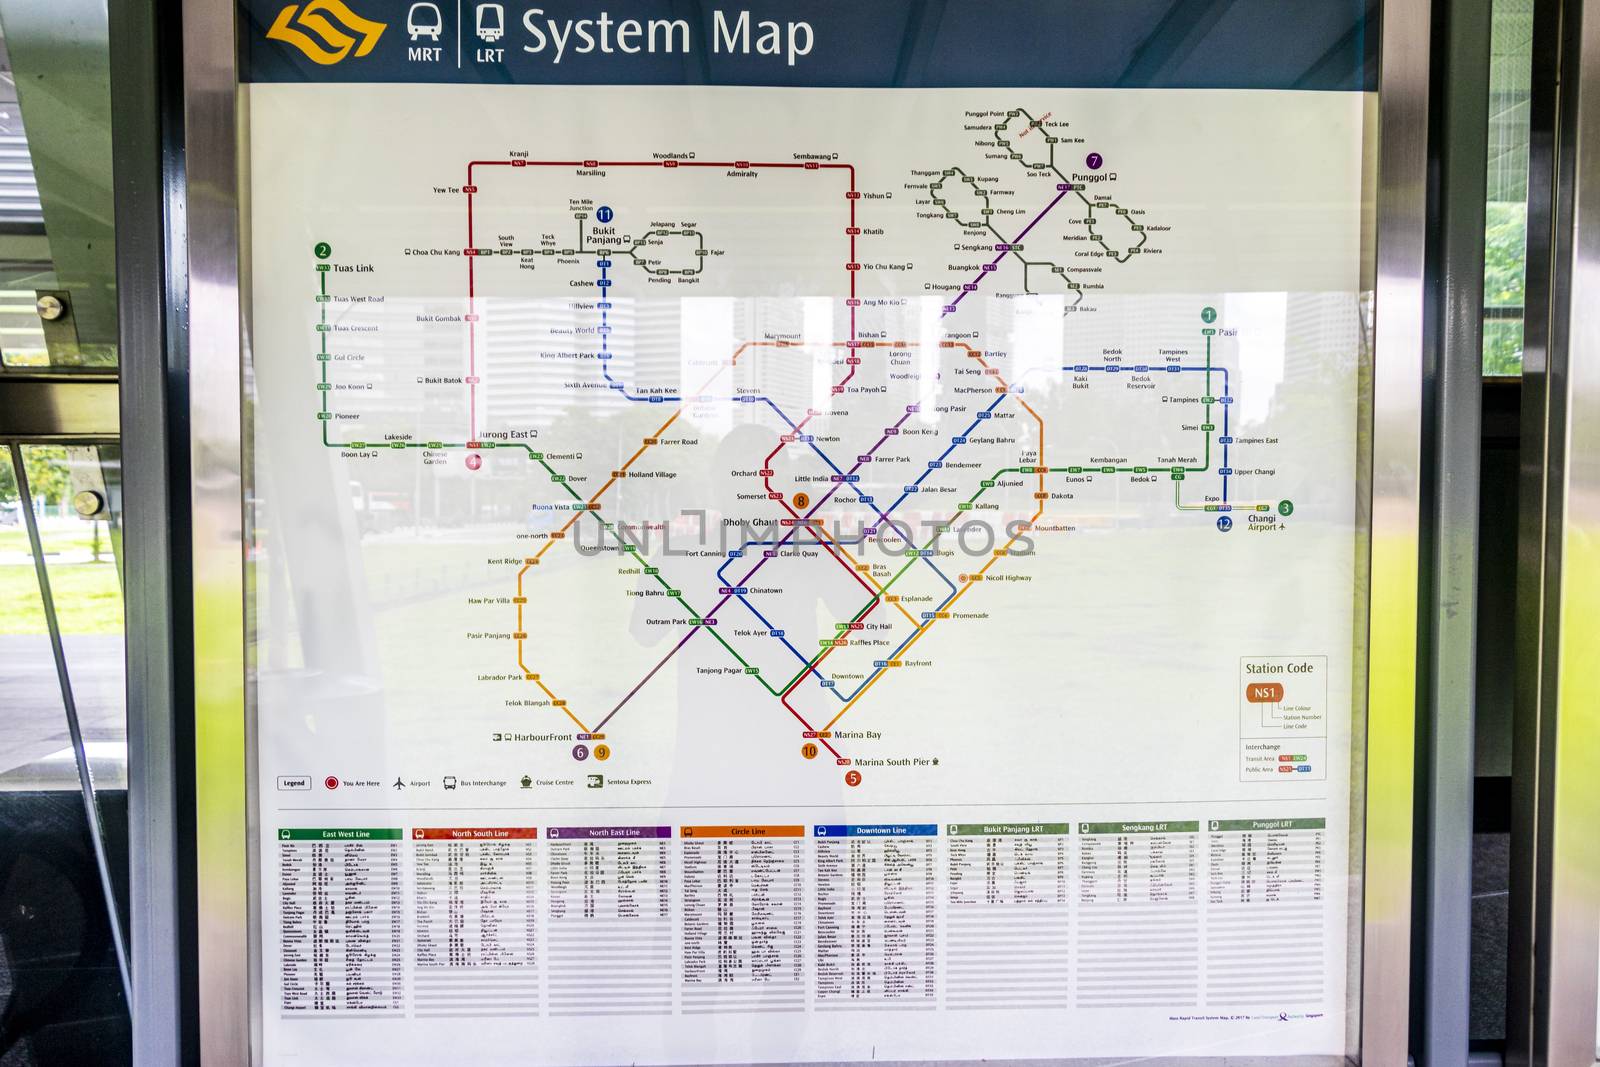 MRT and LRT System Map Metro subway stops in Singapore. by Arkadij